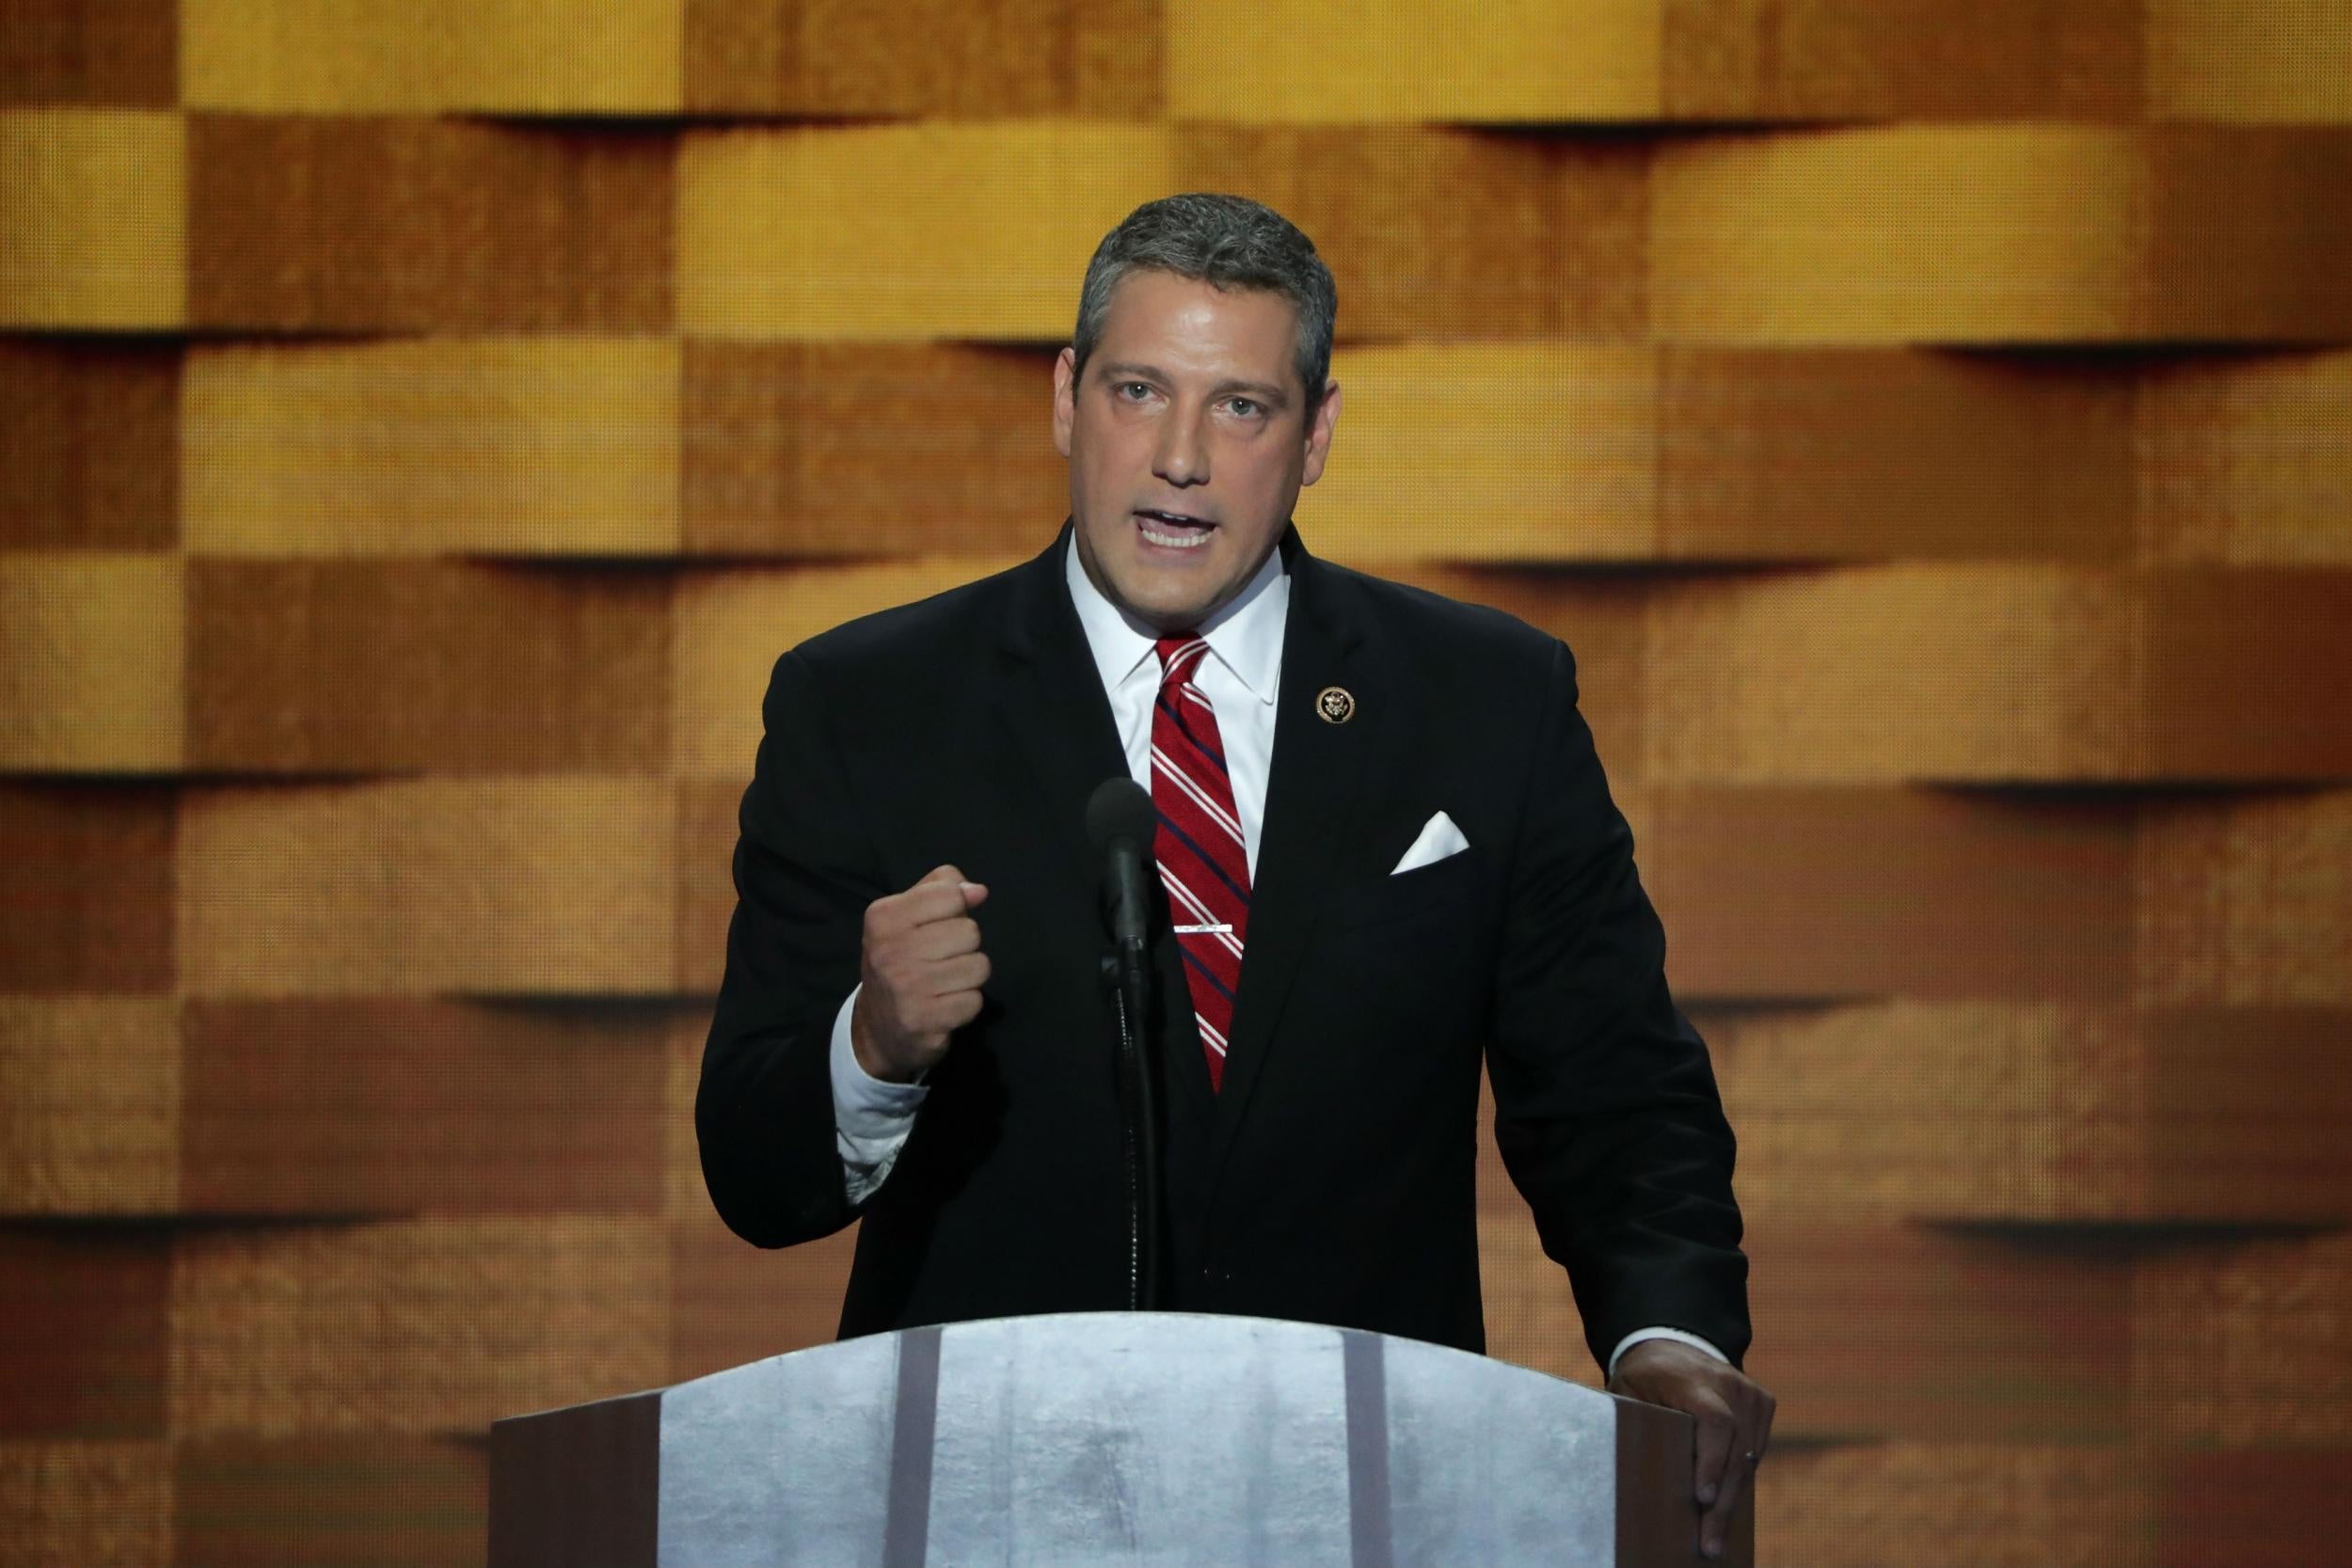 Tim Ryan would be first congressman elected president since 1880